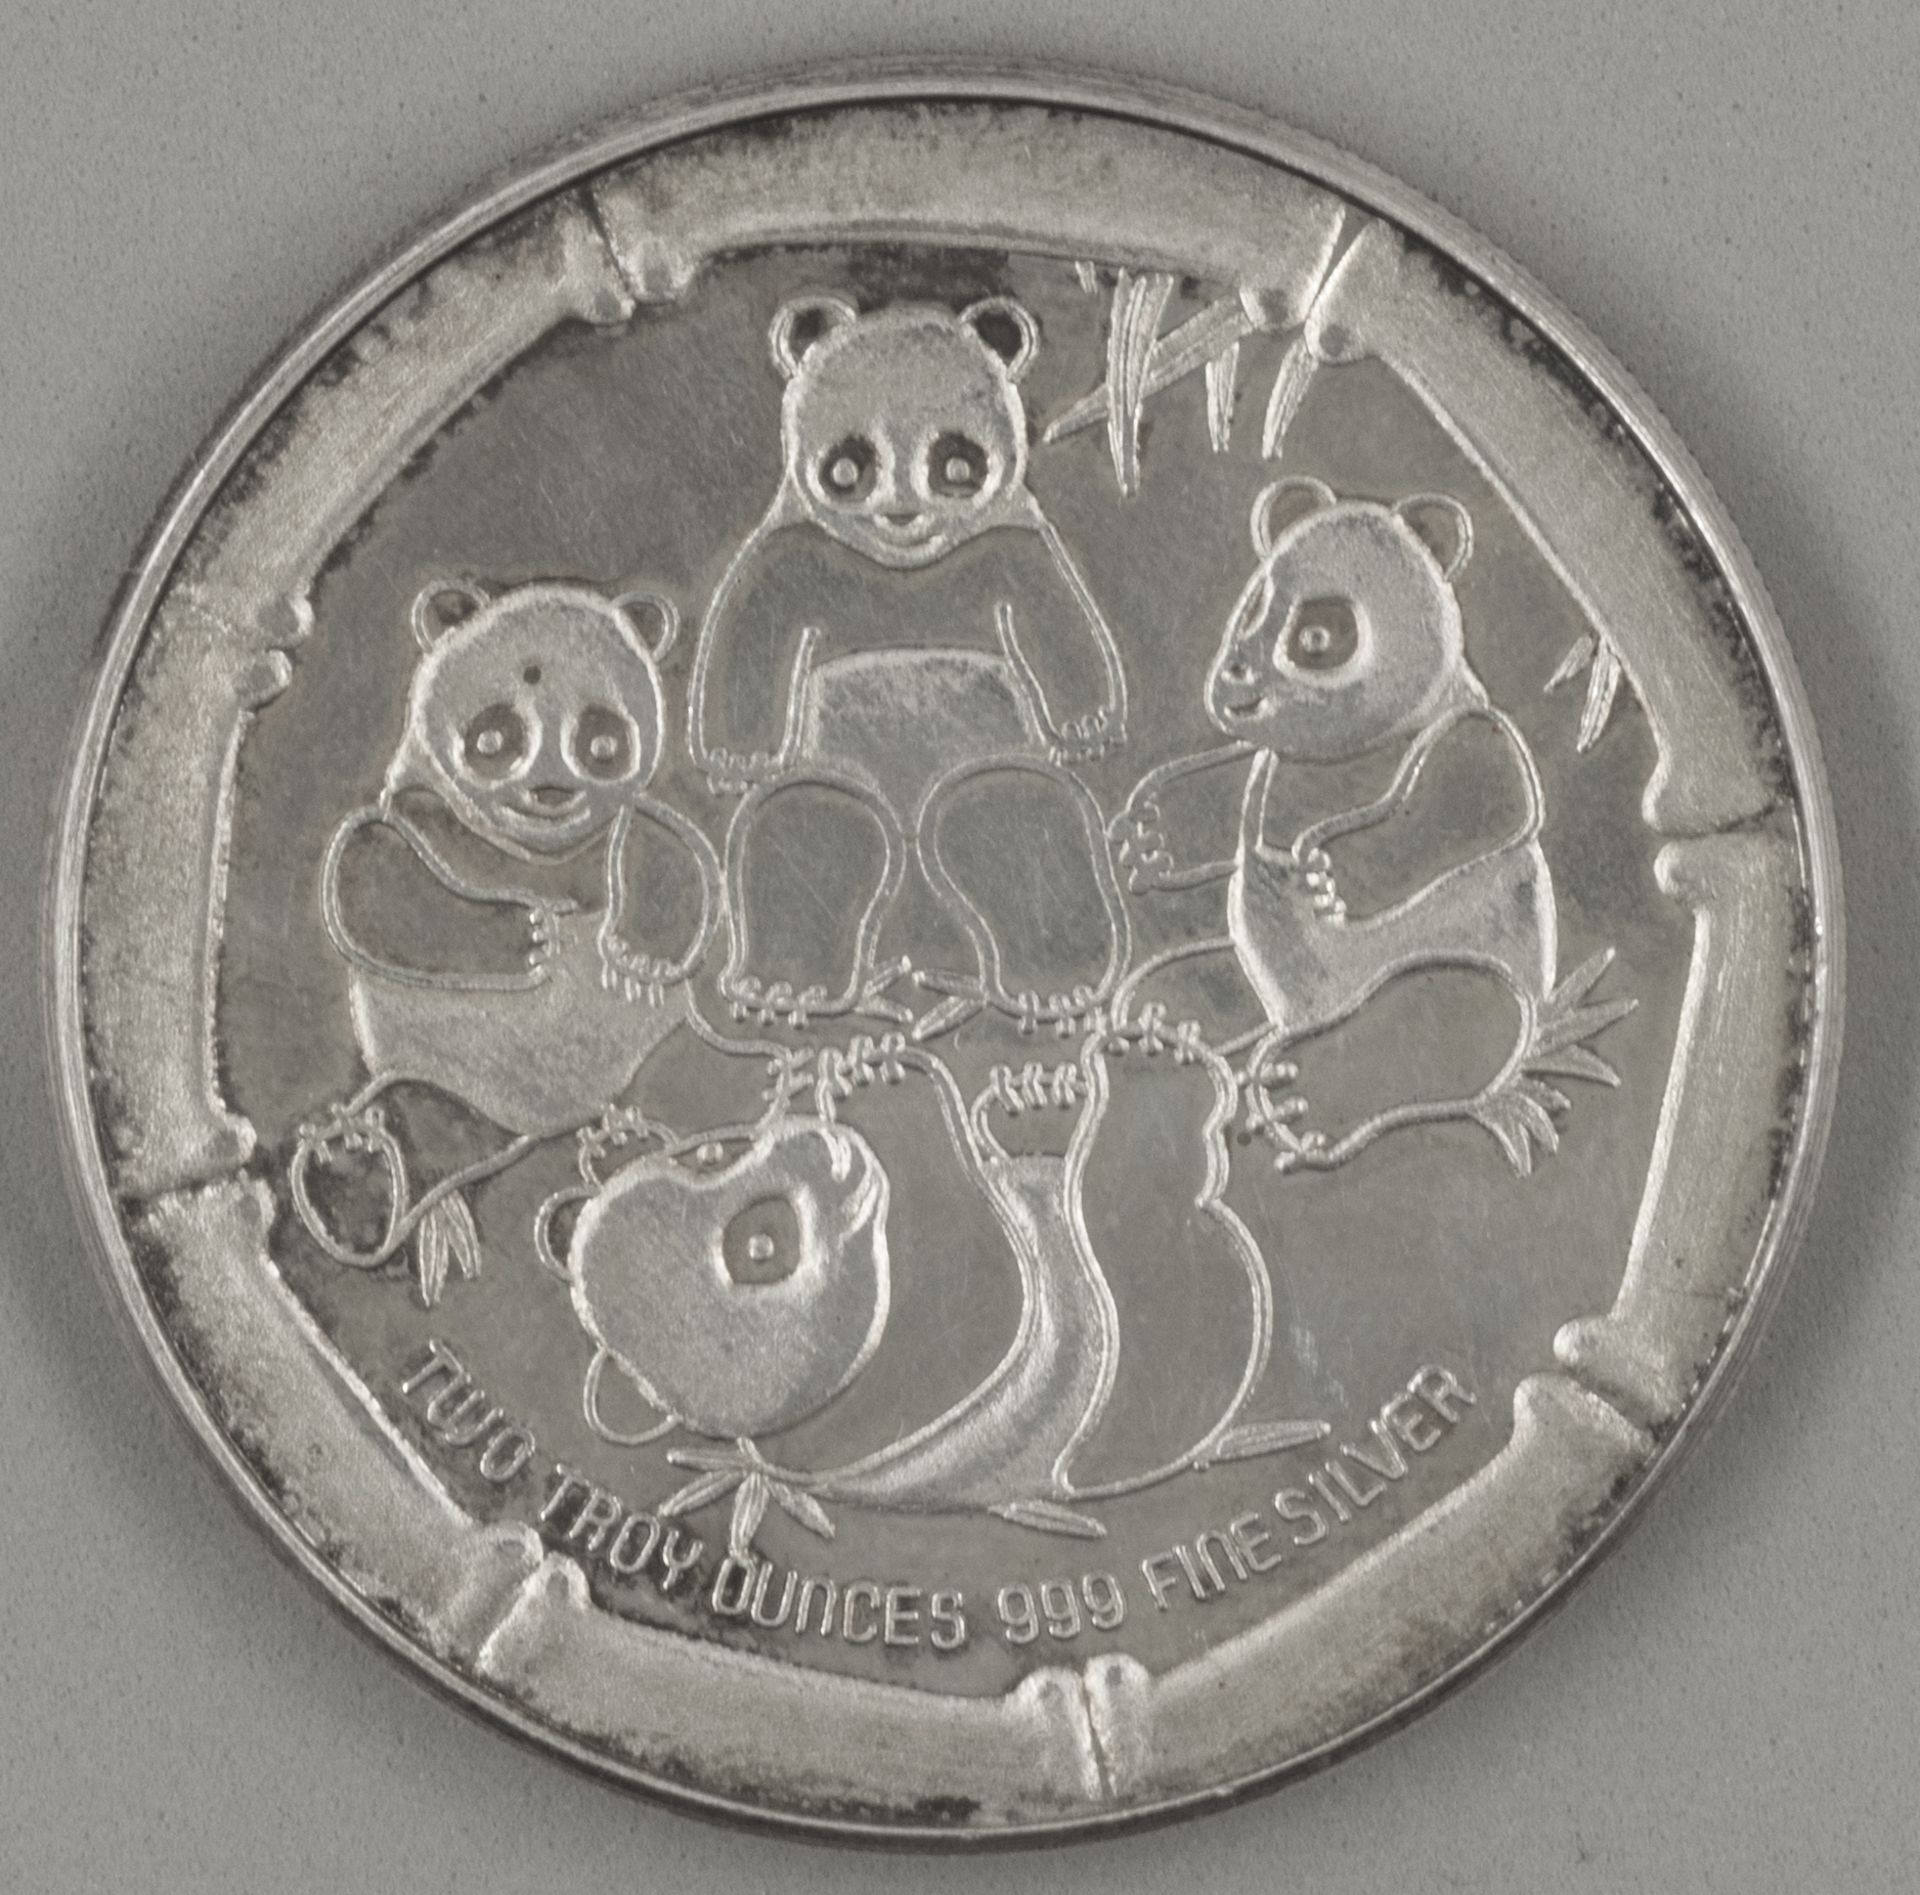 Chinese Panda Commcmorative, 2 Troy Ounce Round, 999 Fine Silver.